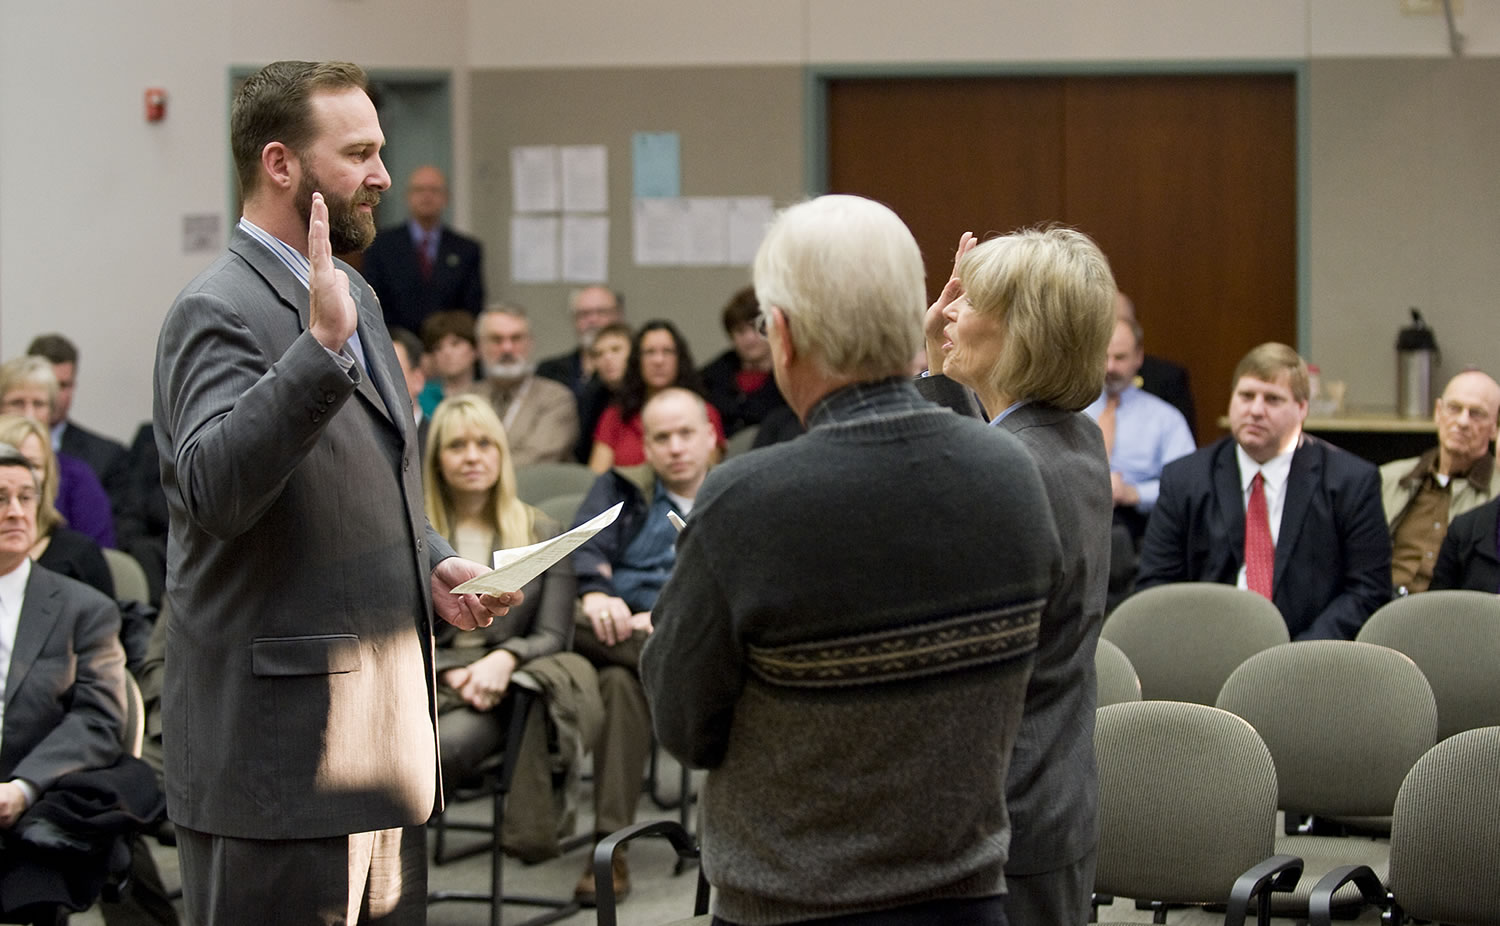 Clark County Commissioner Steve Stuart takes the Oath of Office at the Clark County Public Service Center on Jan.